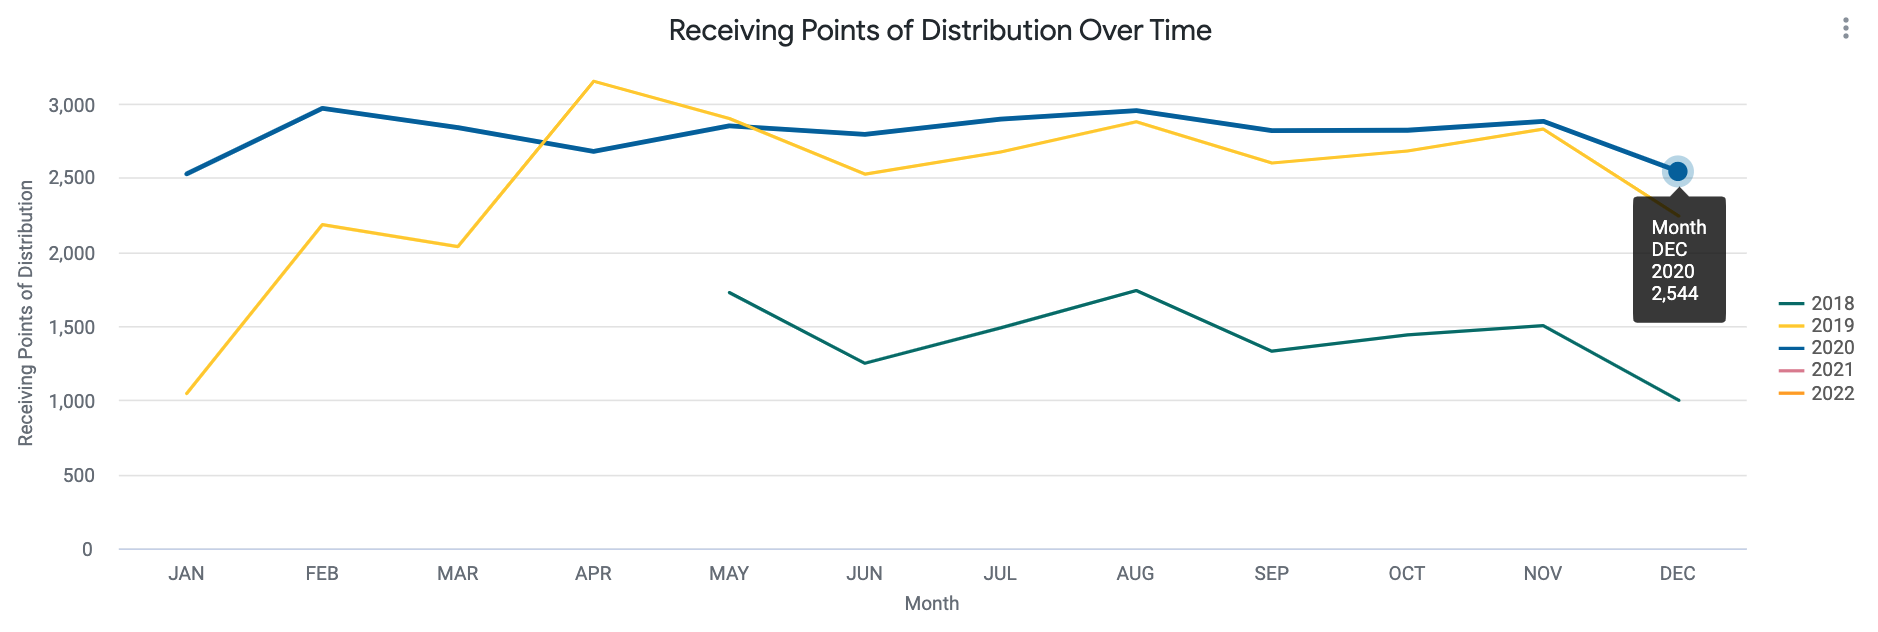 Receiving_Points_of_Distribution_Over_Time.png